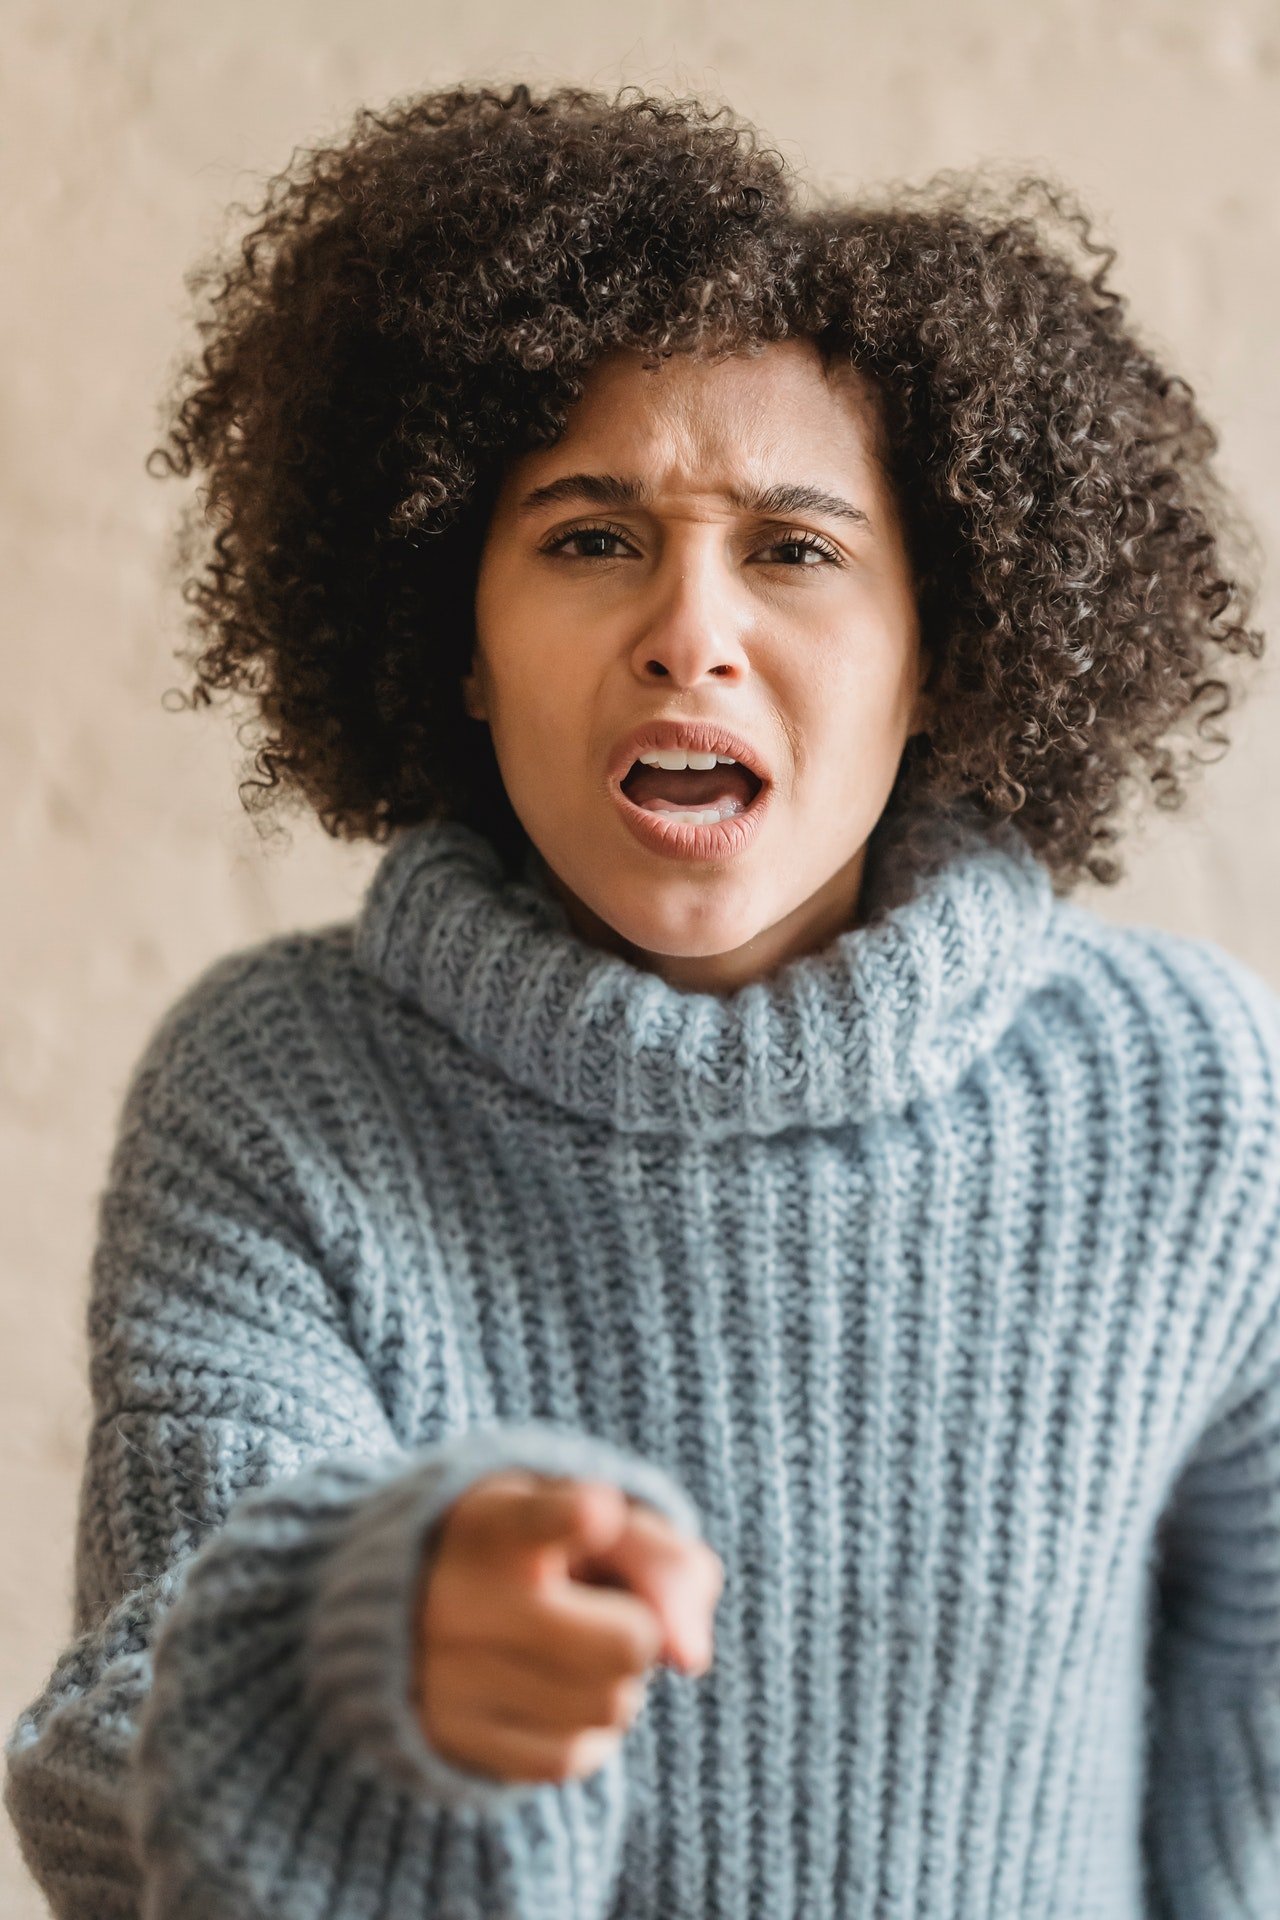 Woman yelling and pointing her finger | Source: Pexels